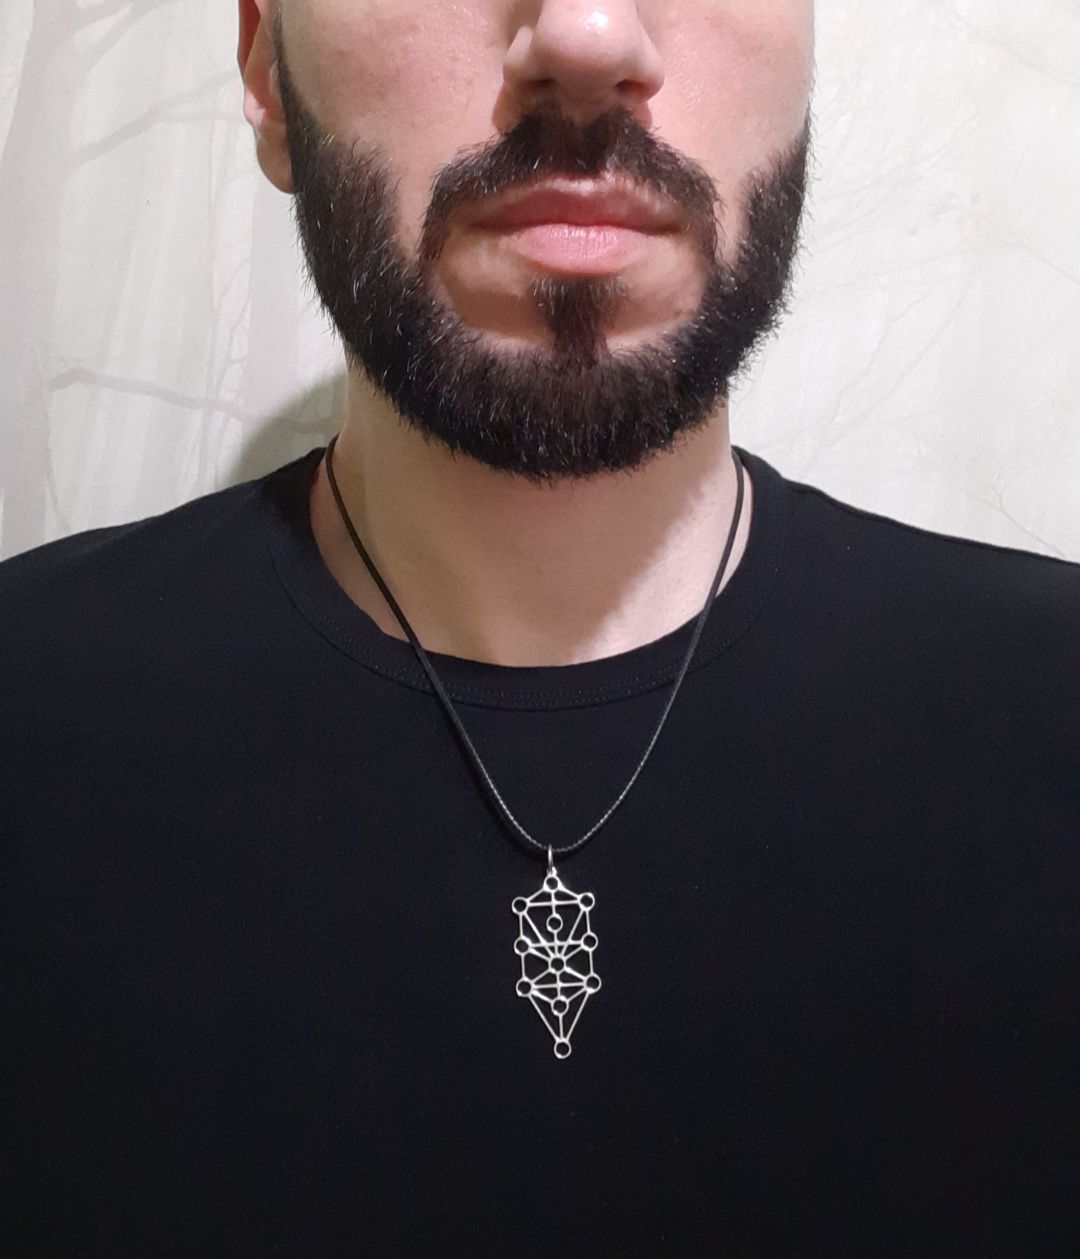 Daniel M. review of Qliphoth Symbol Necklace
